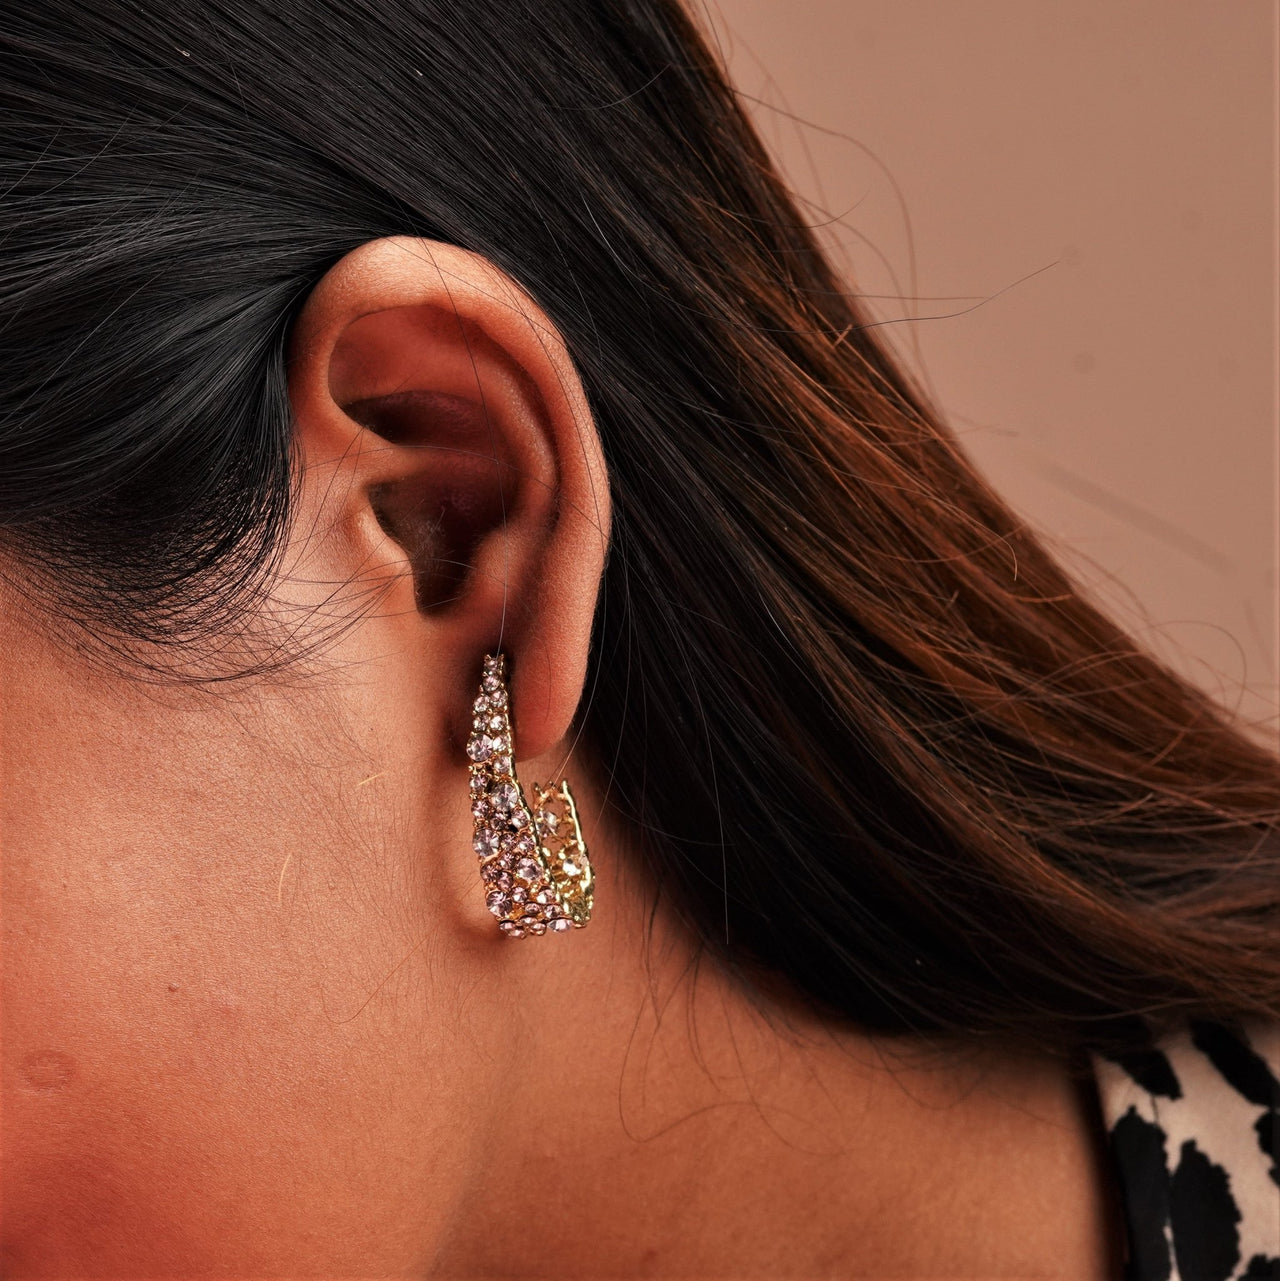 Stylish design earring with alloy